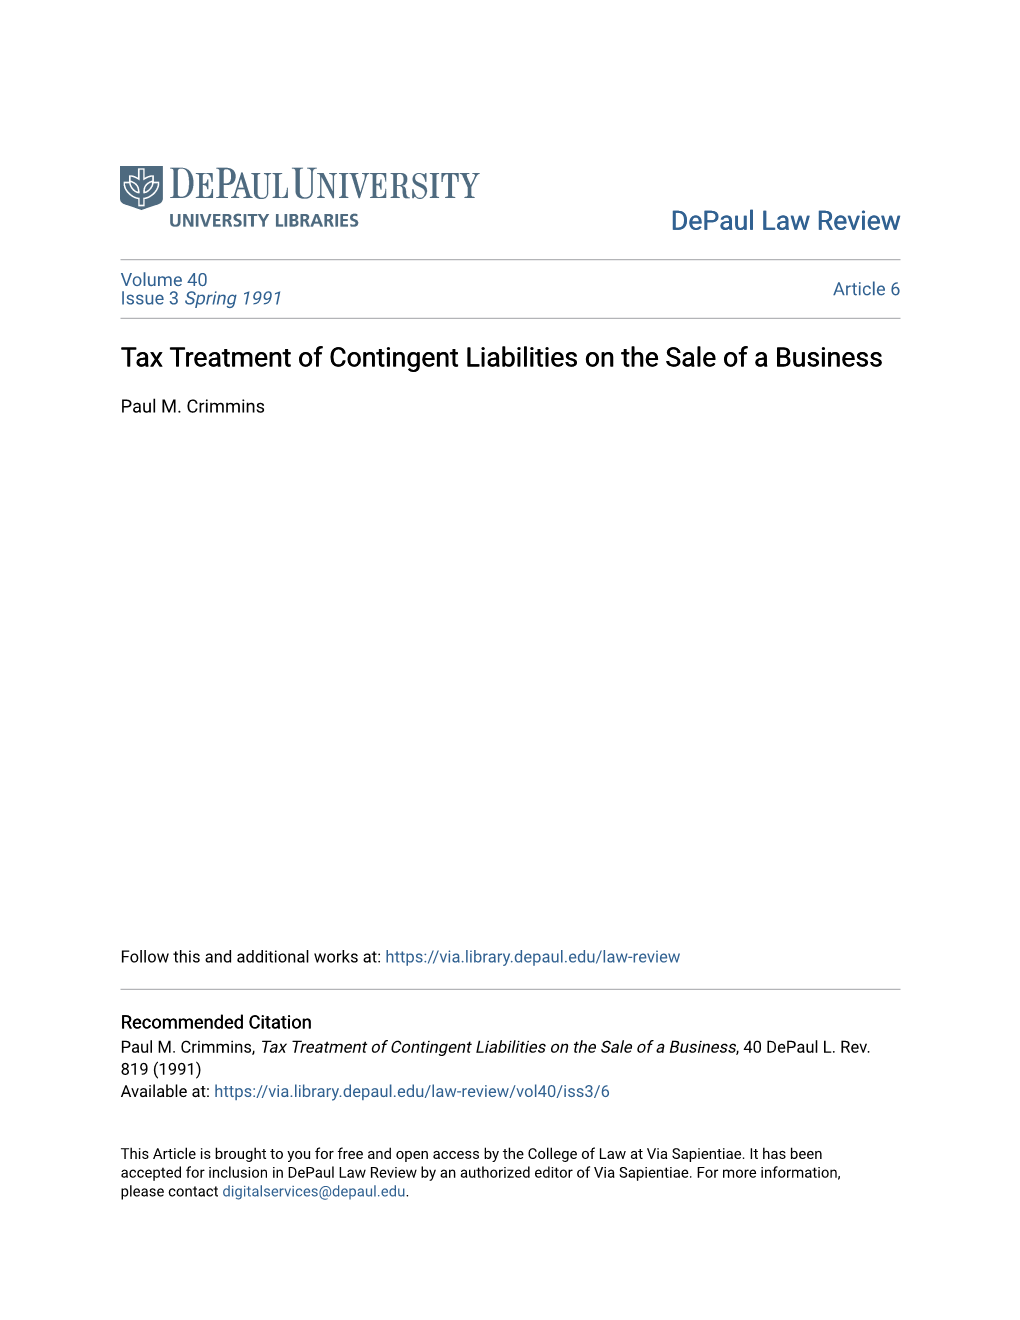 Tax Treatment of Contingent Liabilities on the Sale of a Business